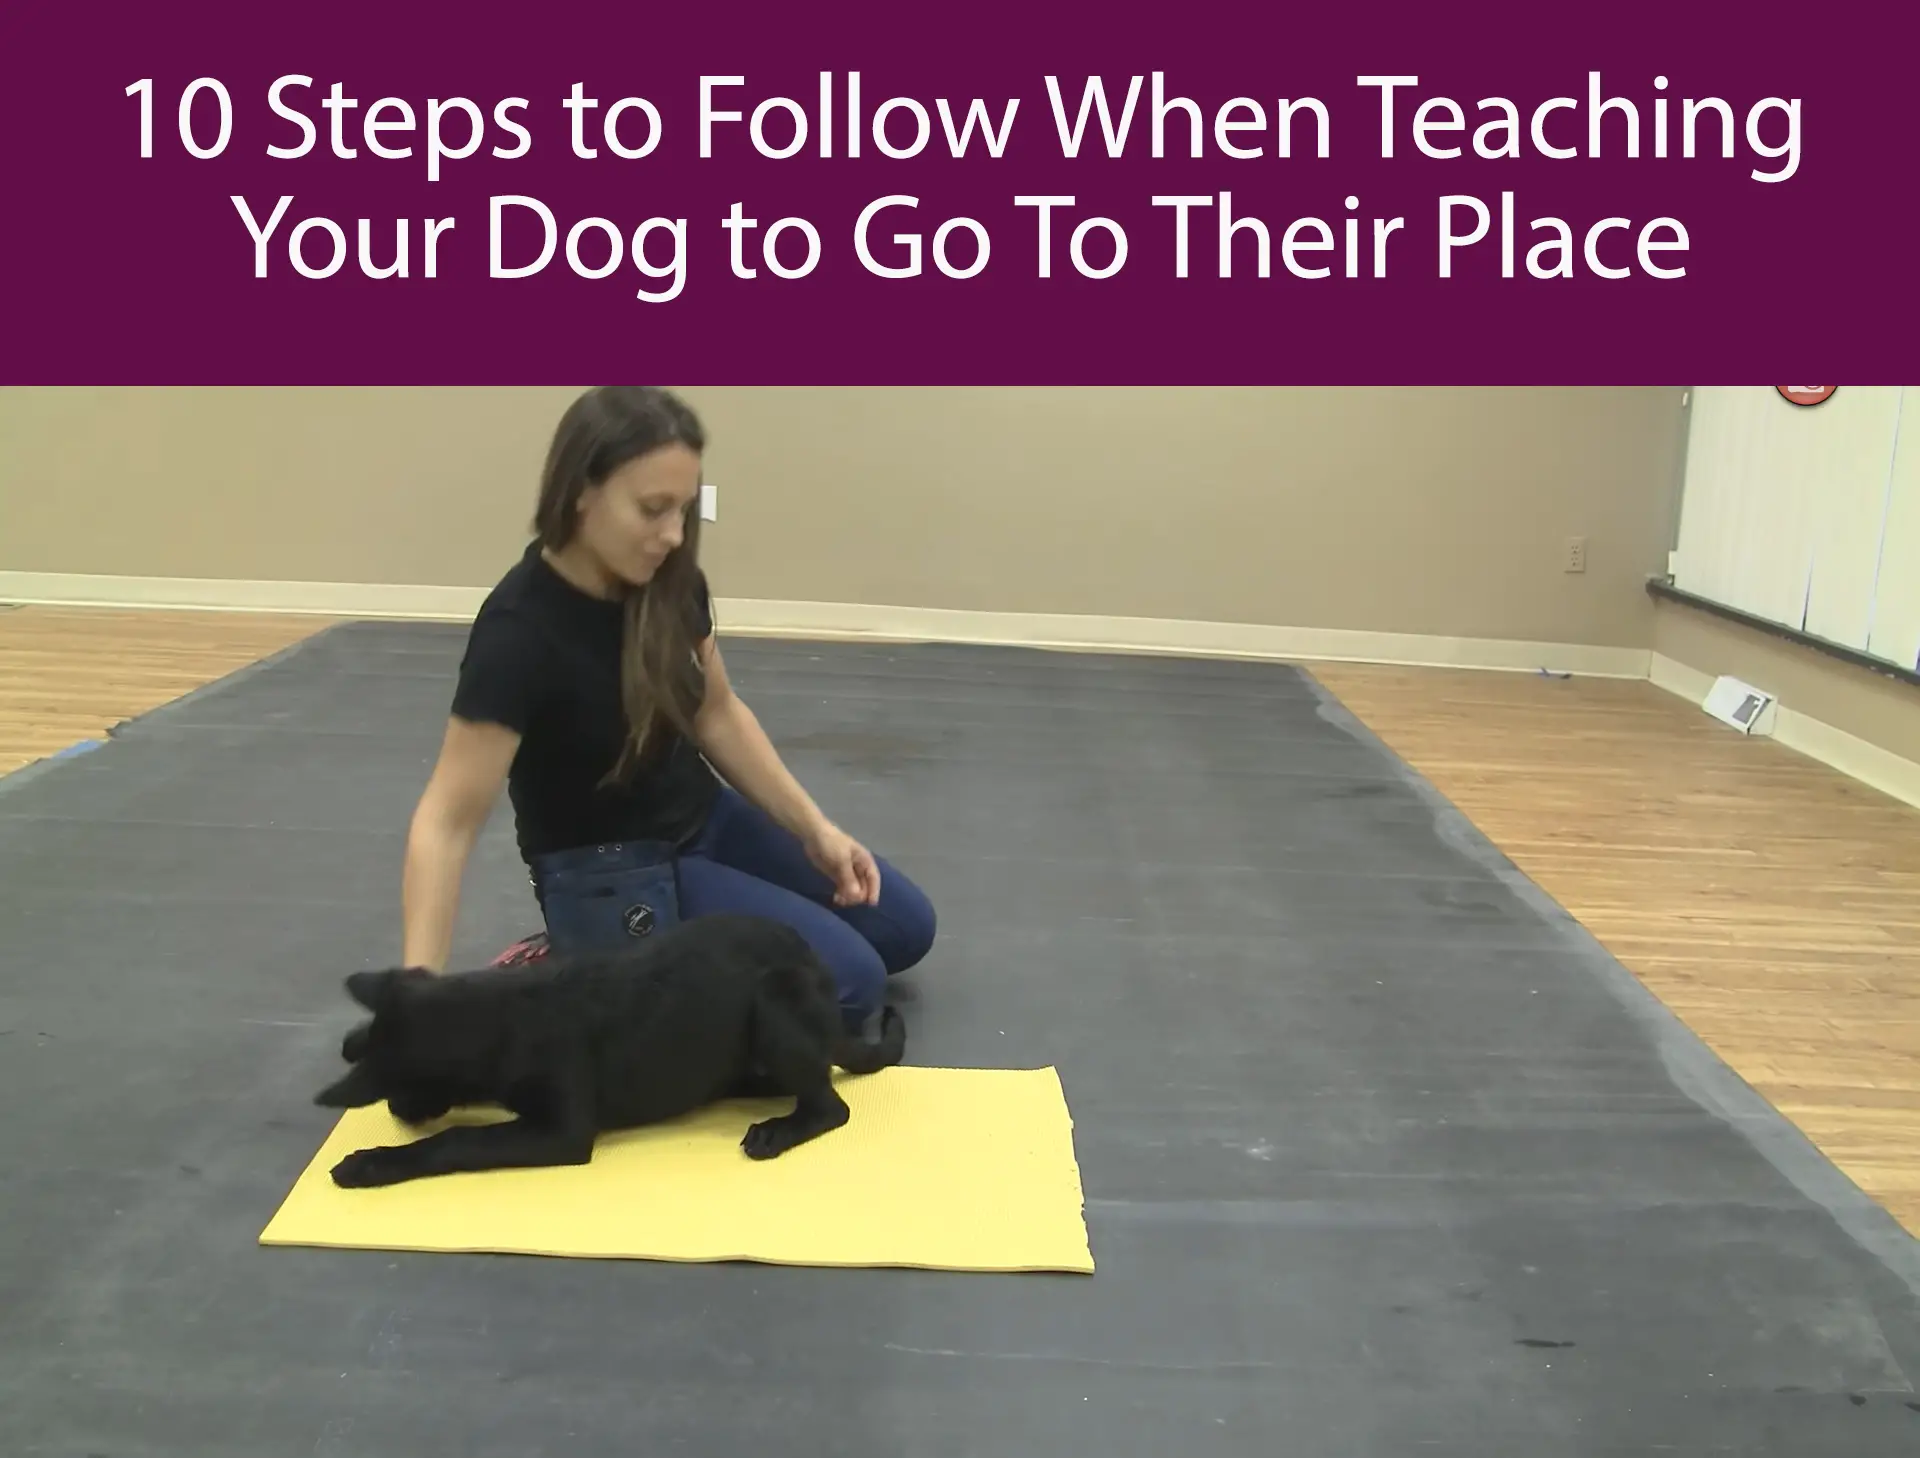 10 Steps to Follow When Teaching Your Dog to Go To Their Place